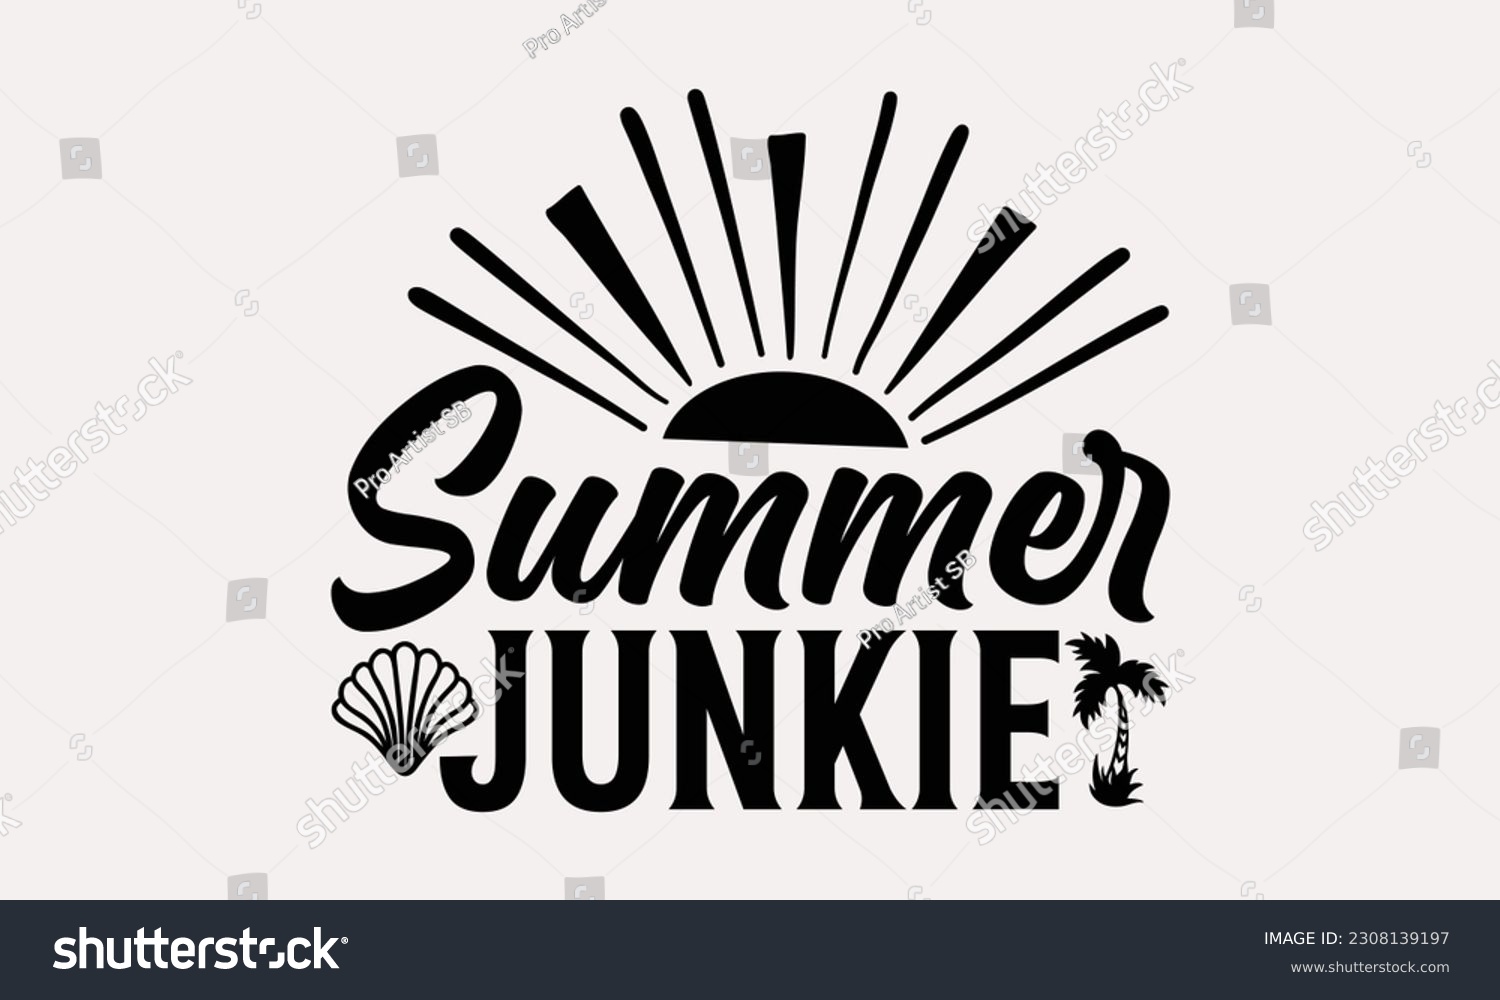 SVG of Summer junkie - Summer T-shirt Design, Funny Beach Quotes SVG, Isolated On White Background, Greeting Card Template with Typography Text. svg